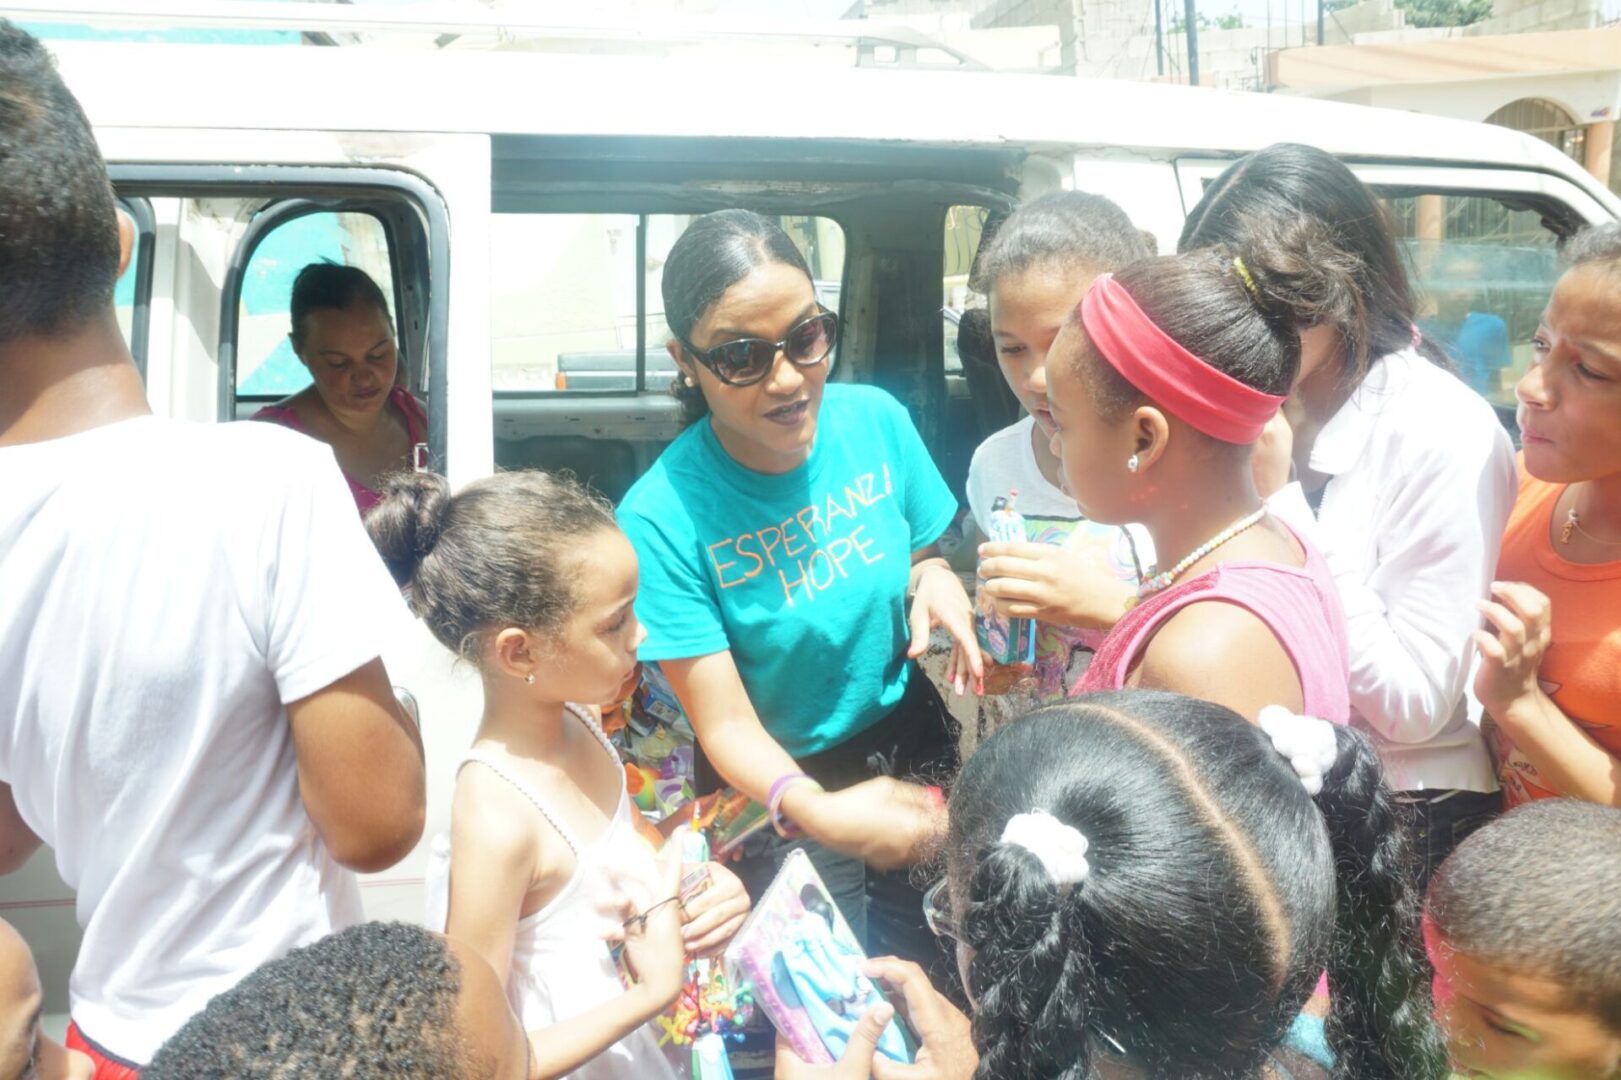 A staff in blue shirt giving out toys to girls outside the car